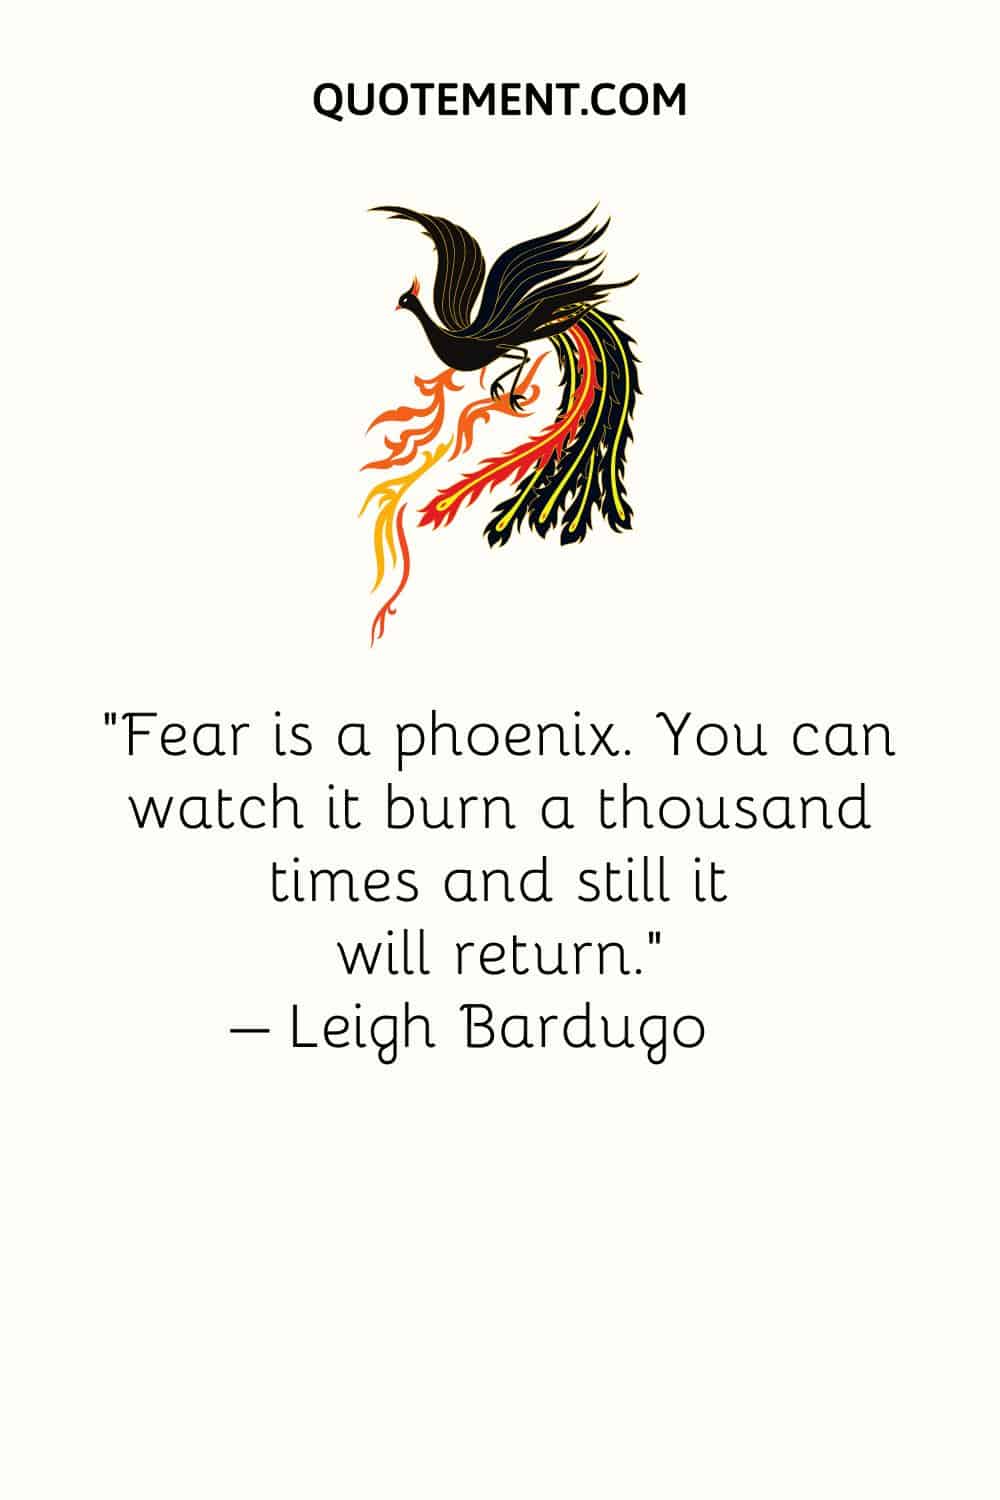 Top Phoenix quote and an illustration of a phoenix.